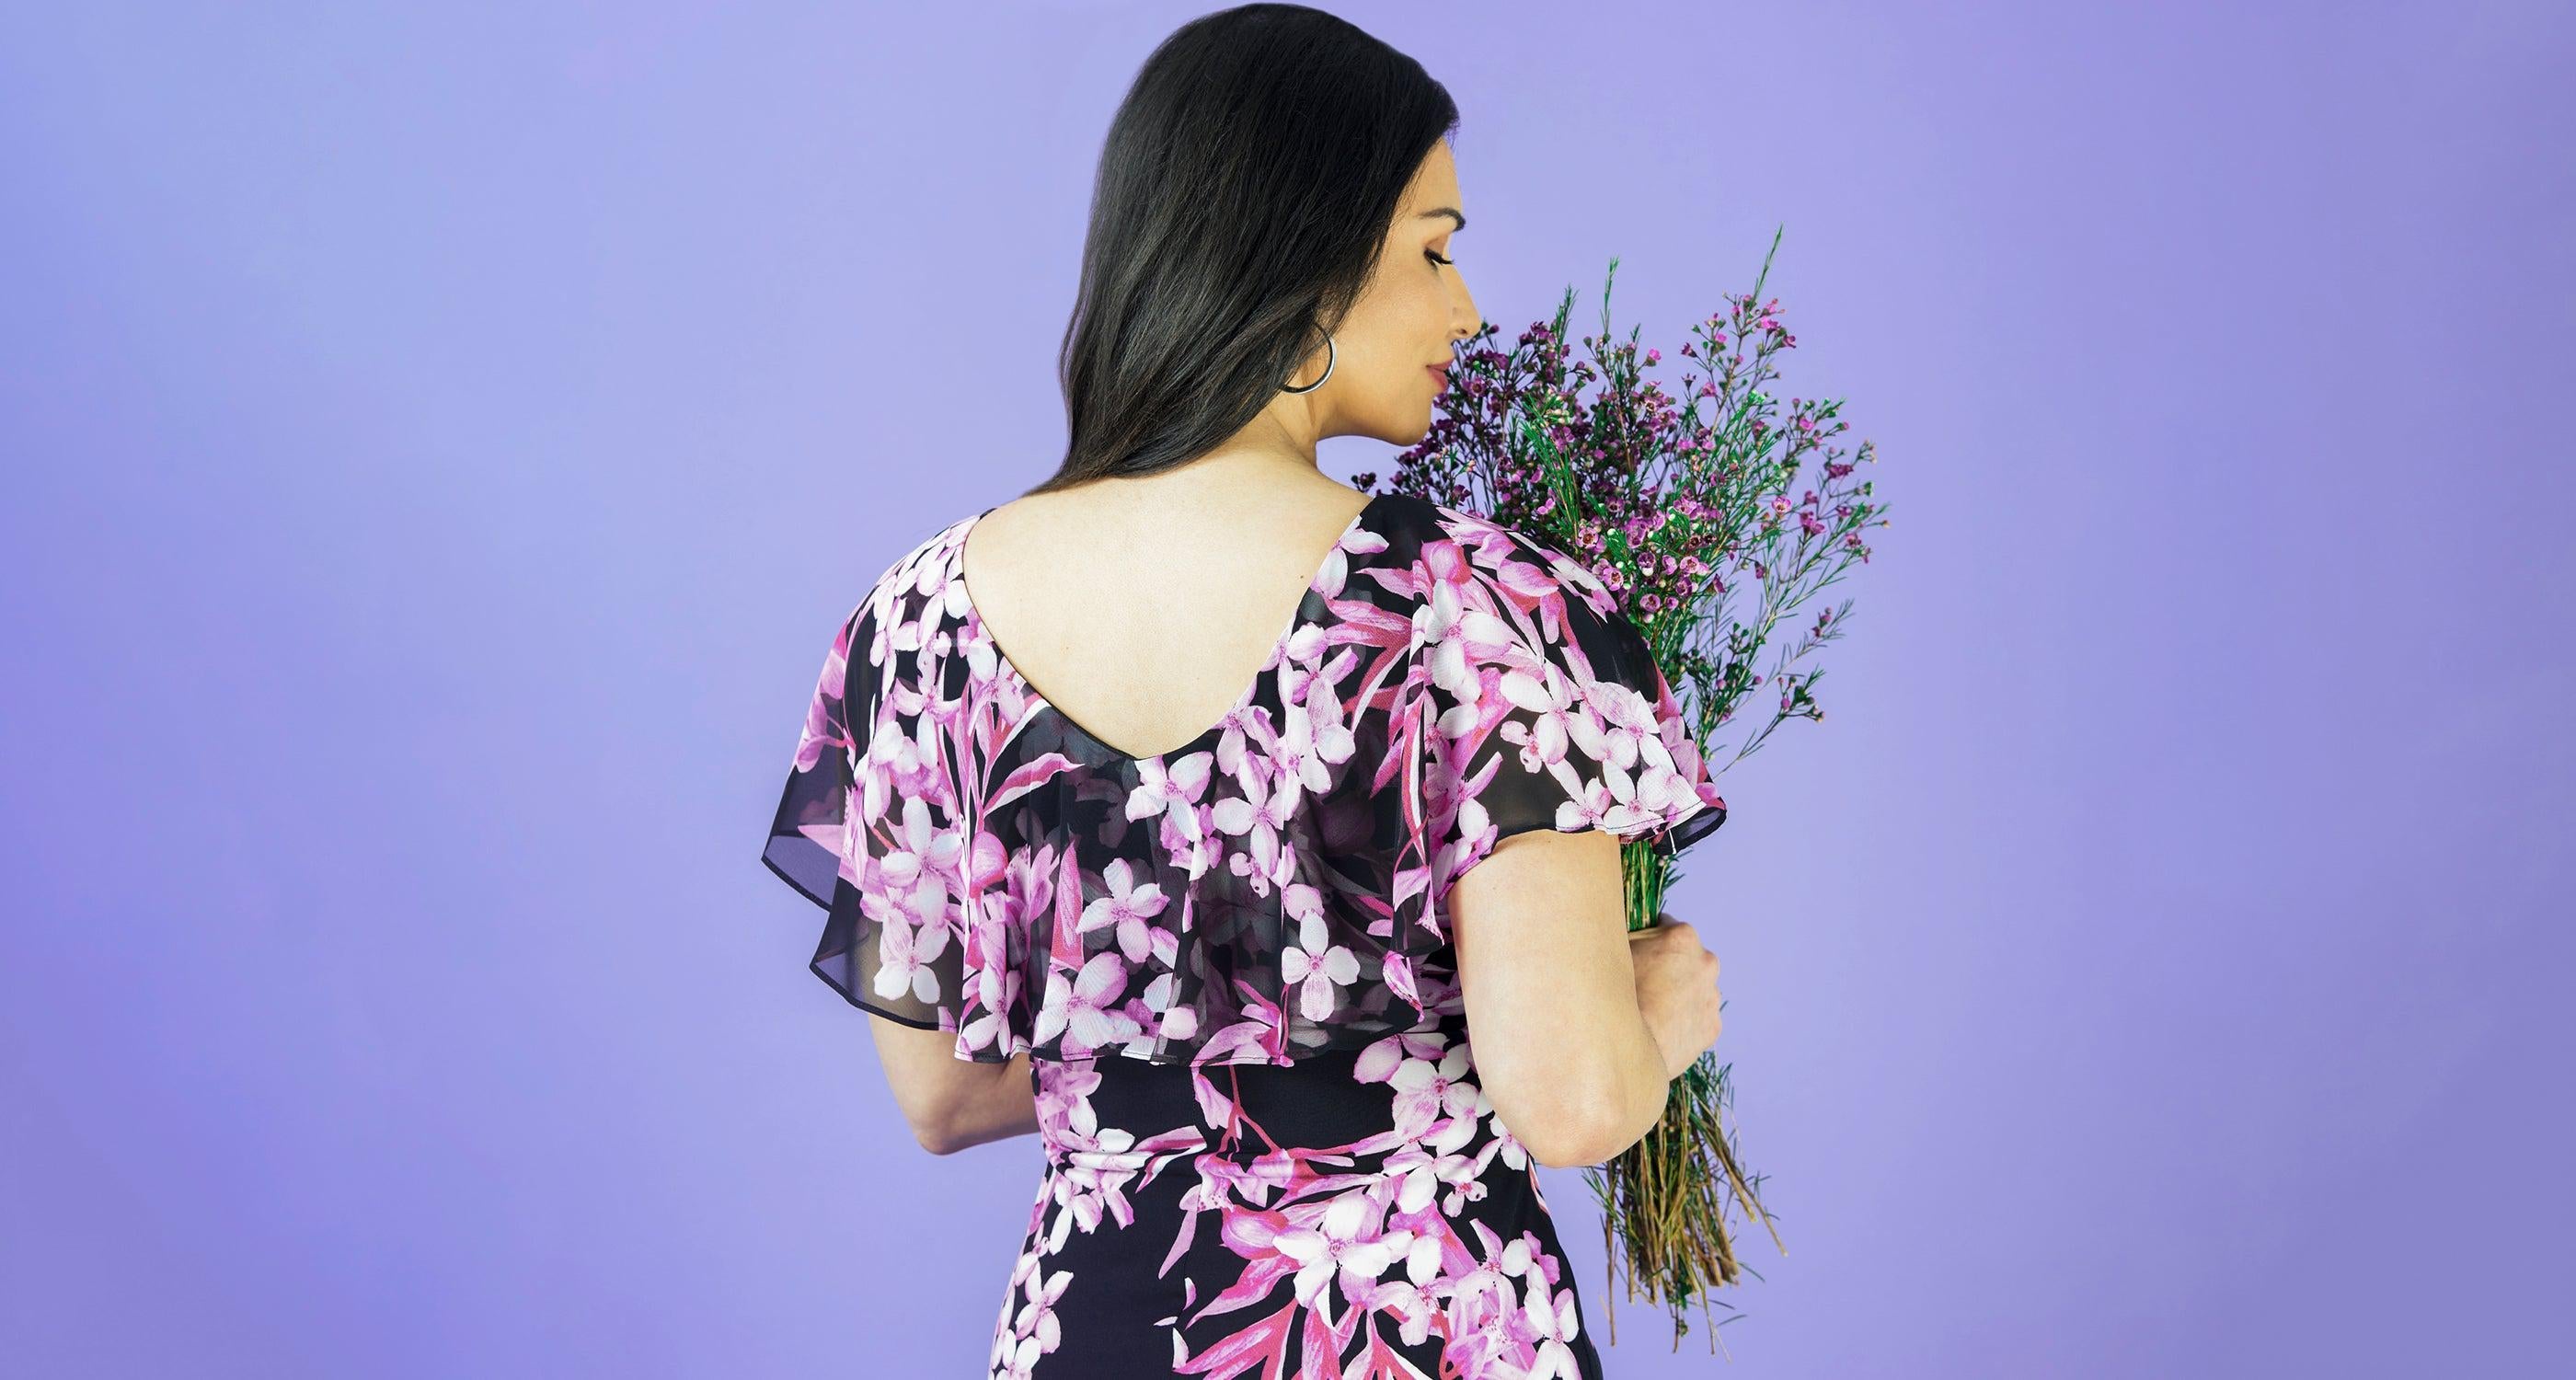 How to Wear a Dress in Different Seasons: Black Floral Print in